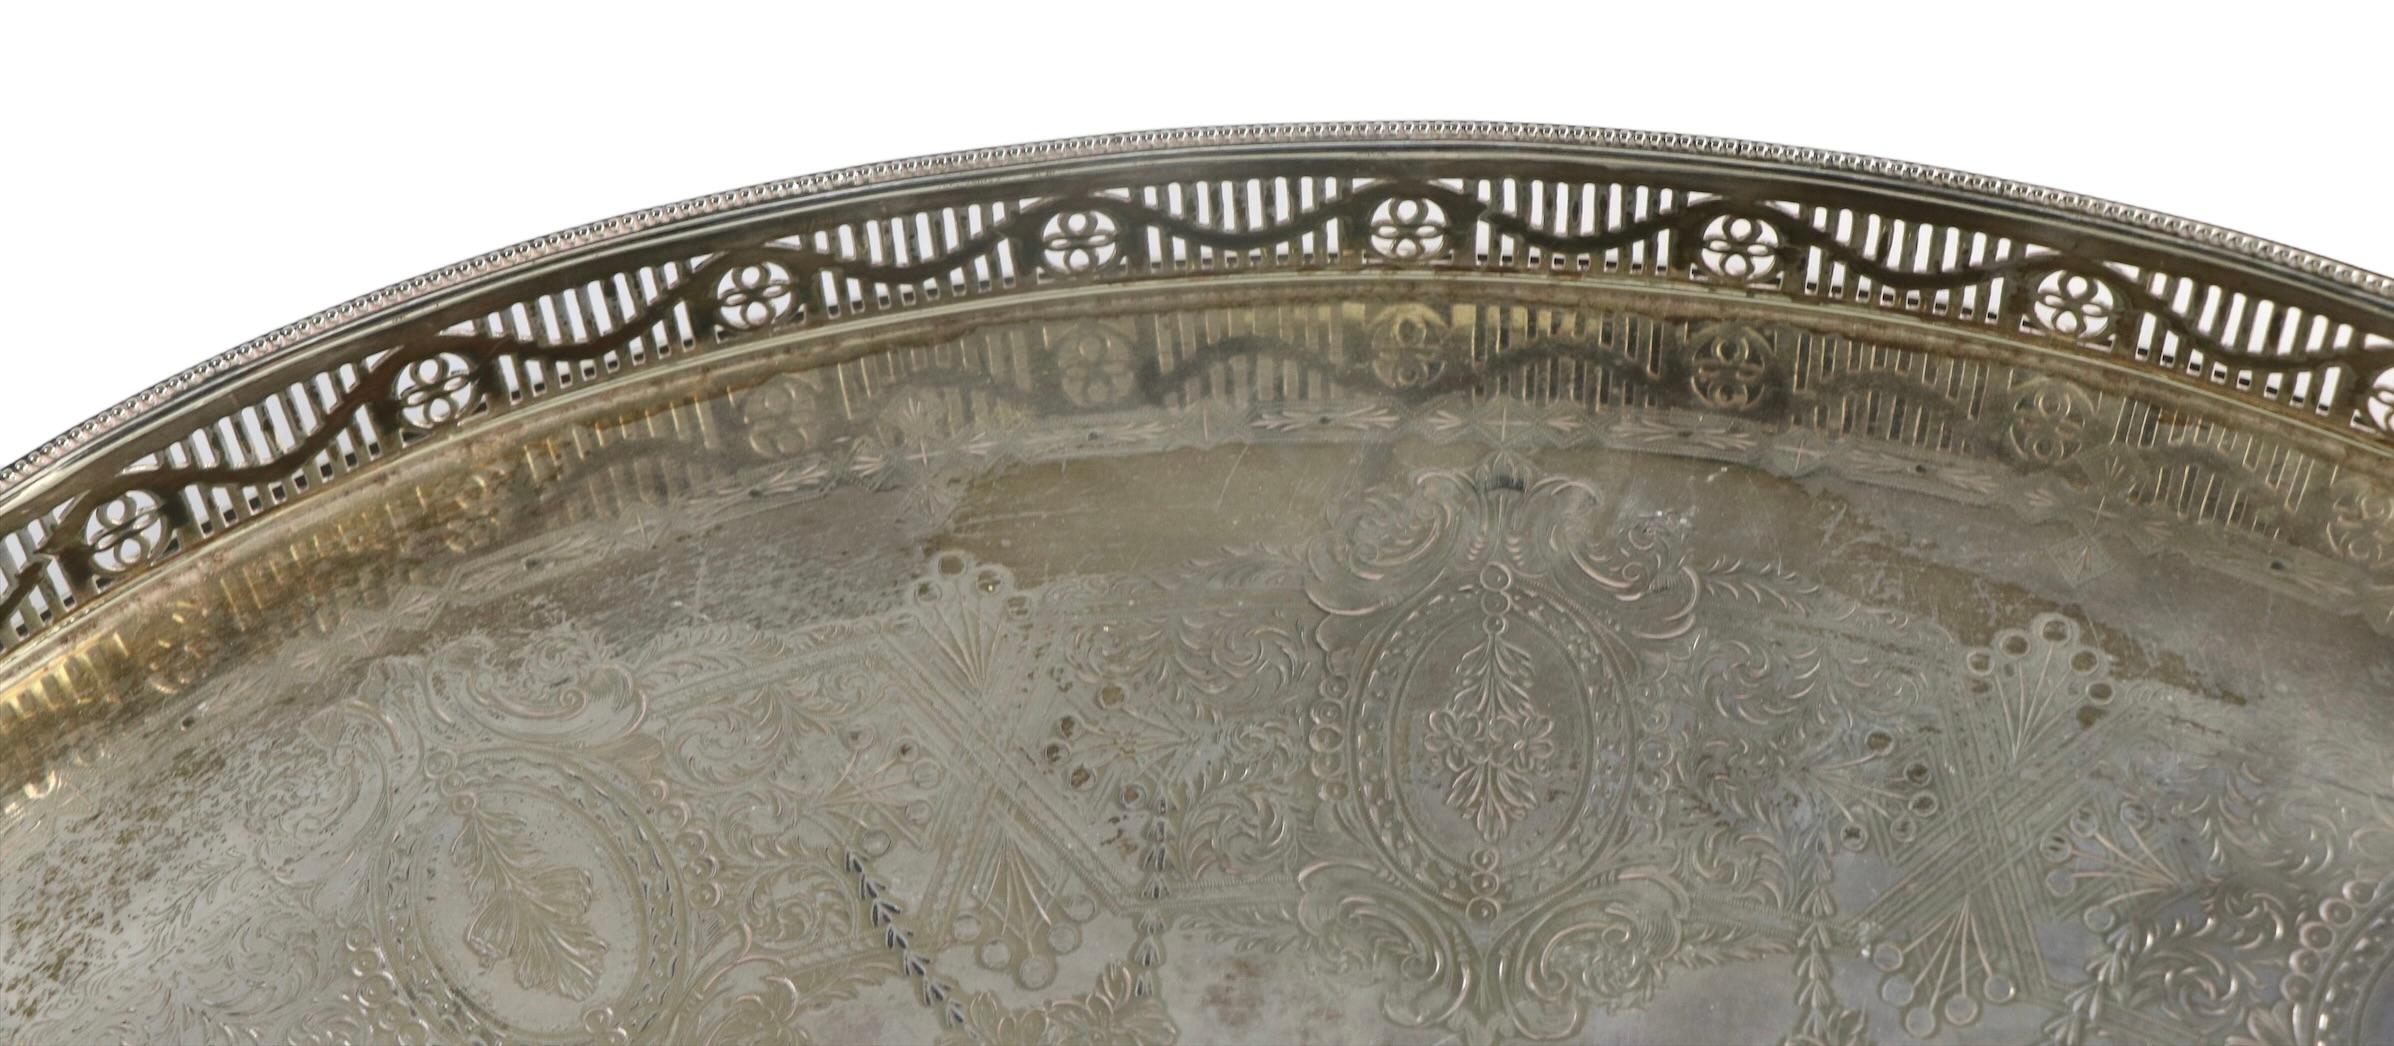 Large Ornate Oval Footed Victorian Silver Plate Tray with Gallery and Handles For Sale 7